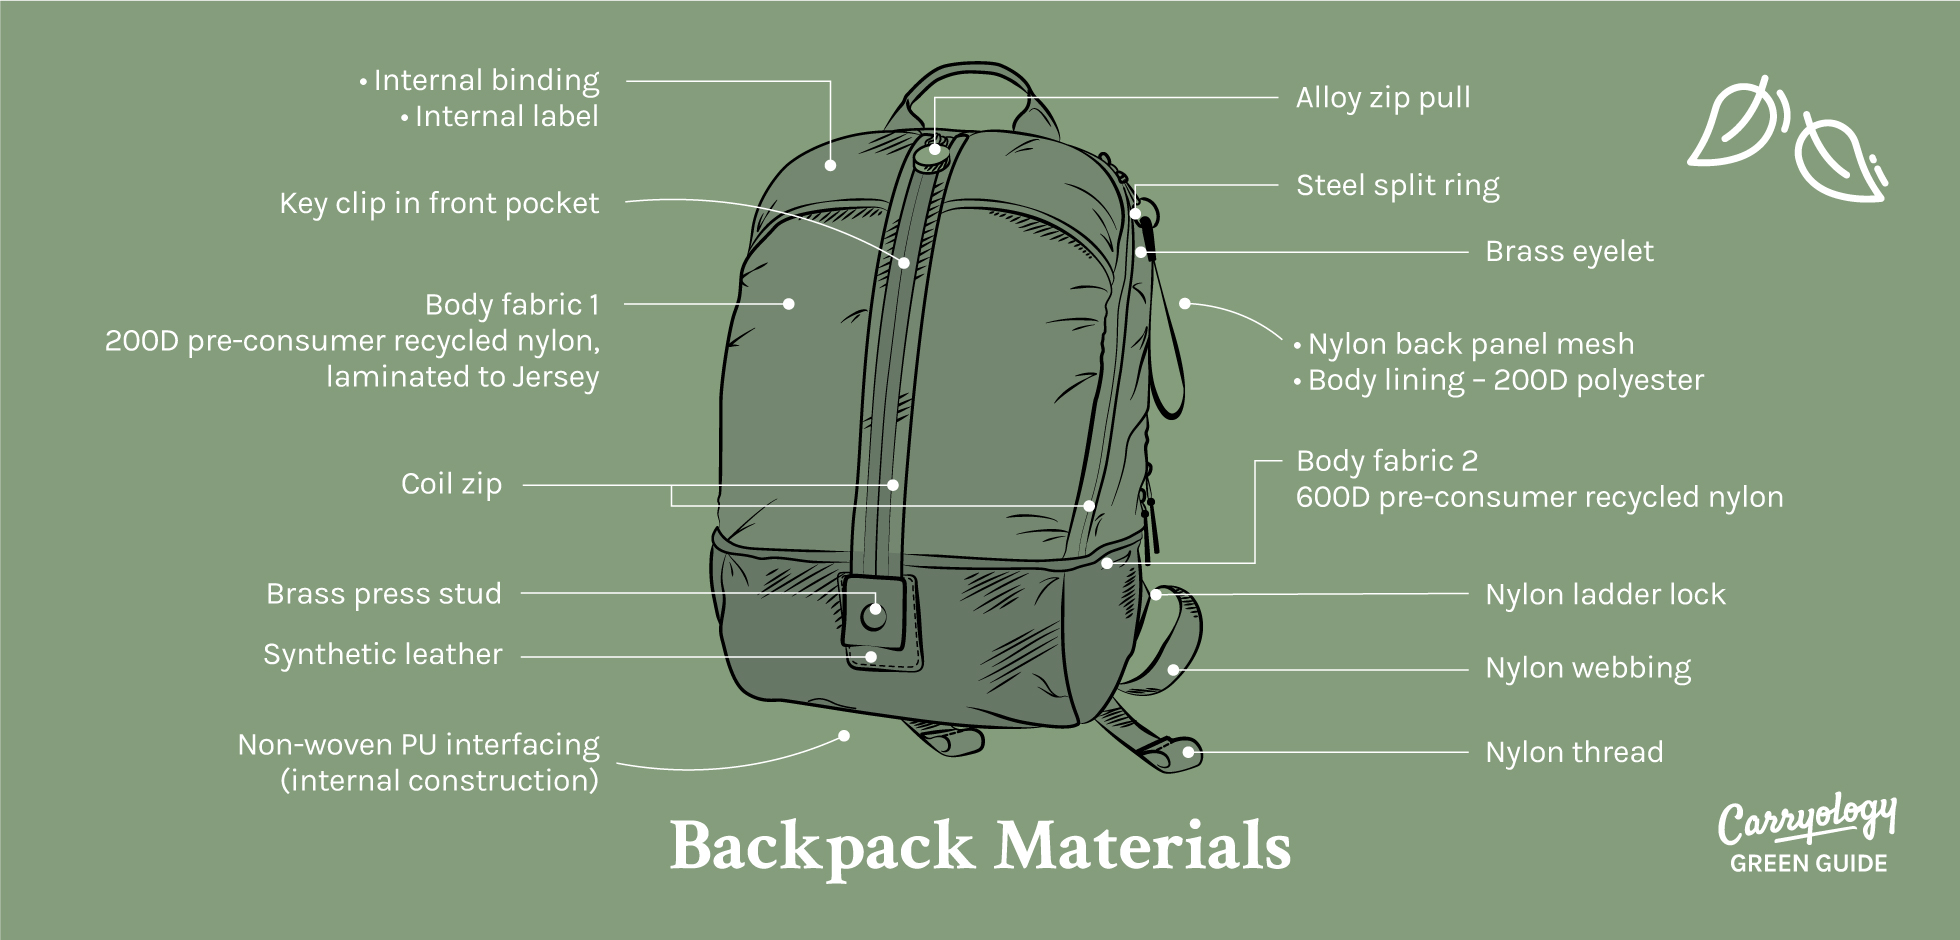 is my backpack sustainable?